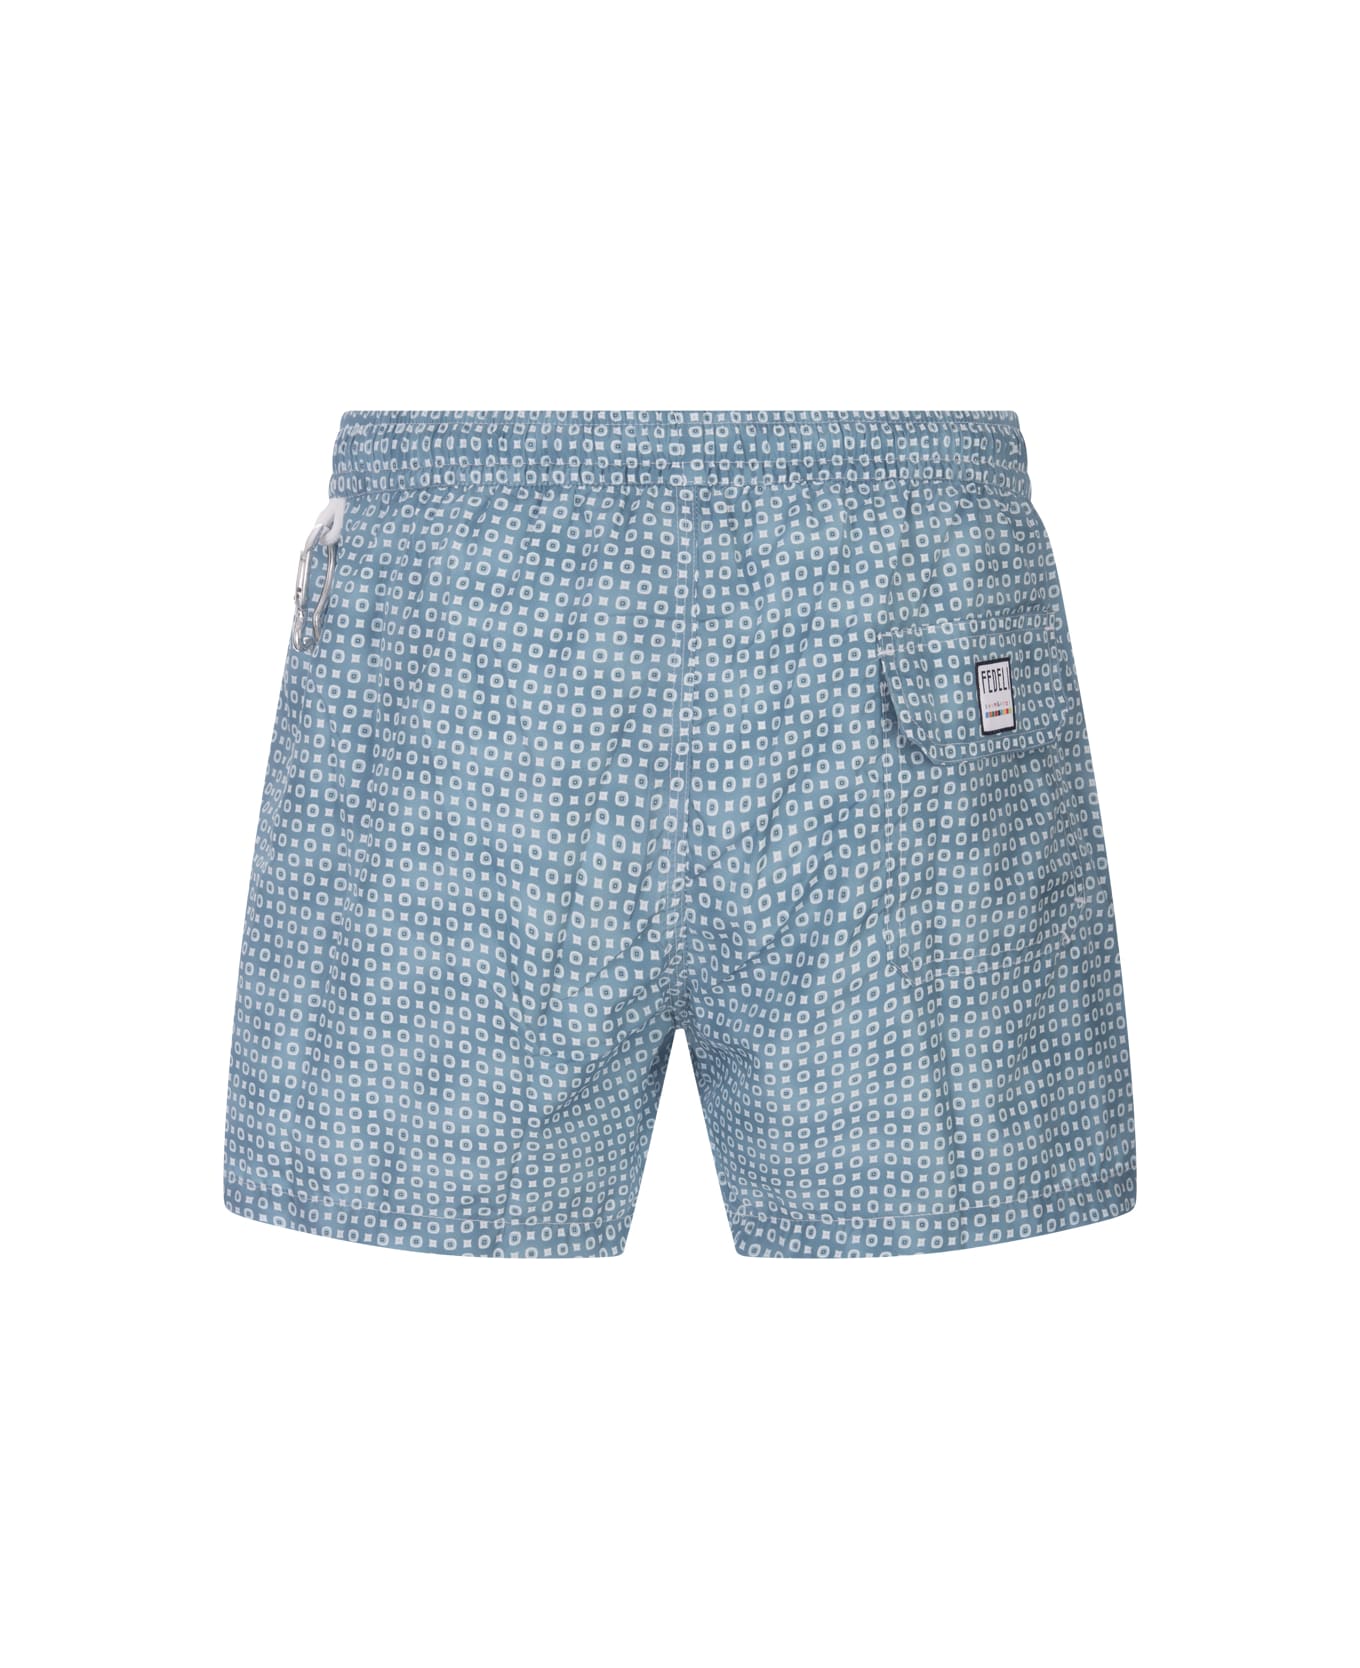 Fedeli Teal Blue Swim Shorts With Micro Pattern - Blue